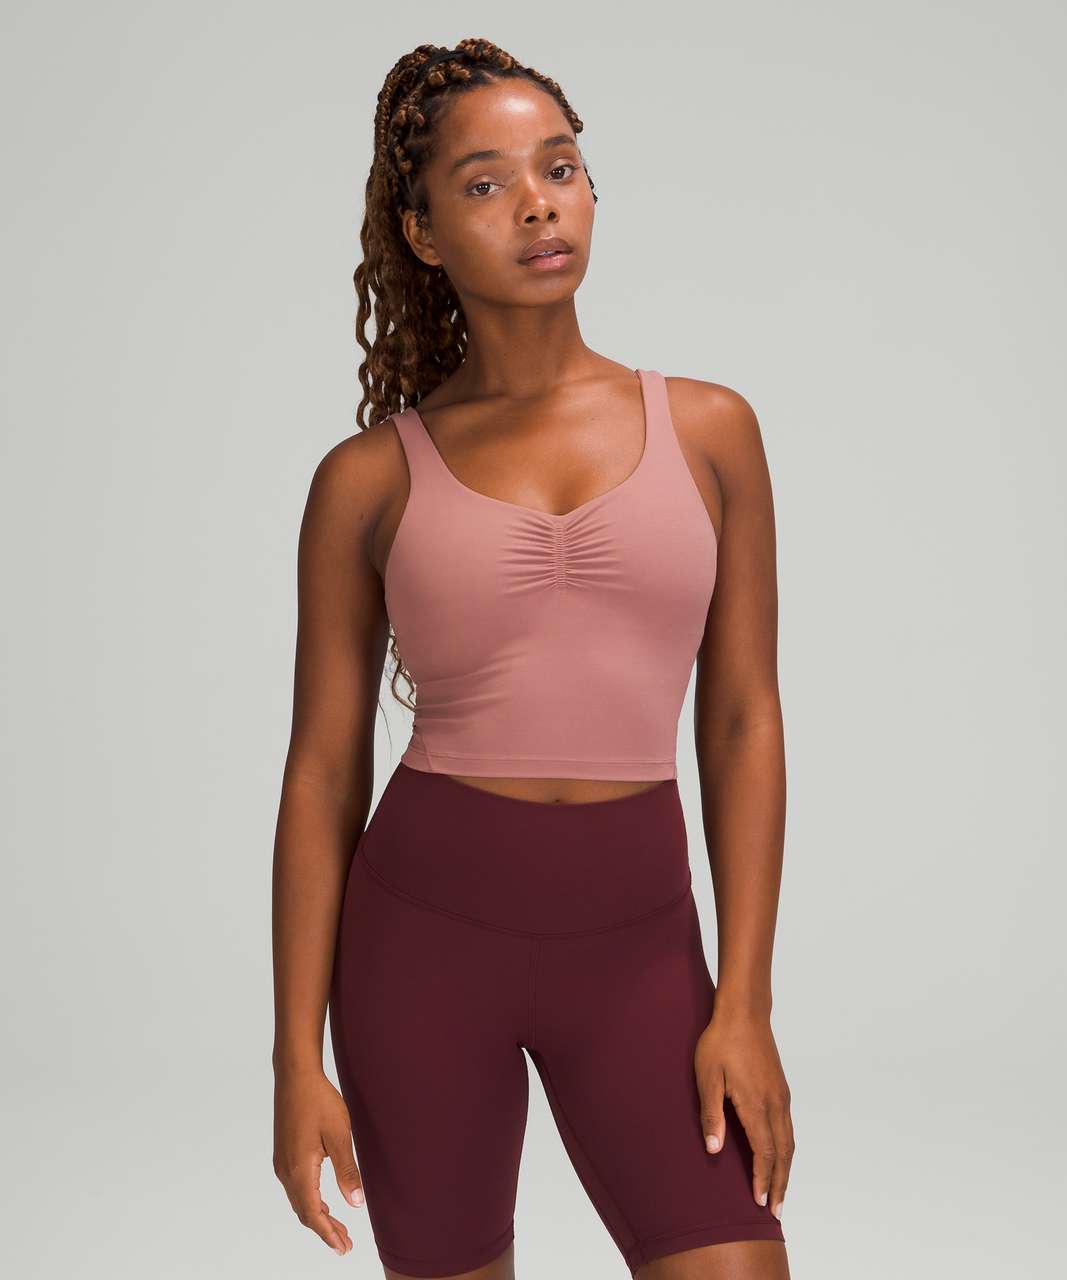 Spotted Chambray Align Tank on China website🤭 Are they going to drop in  U.S? : r/lululemon